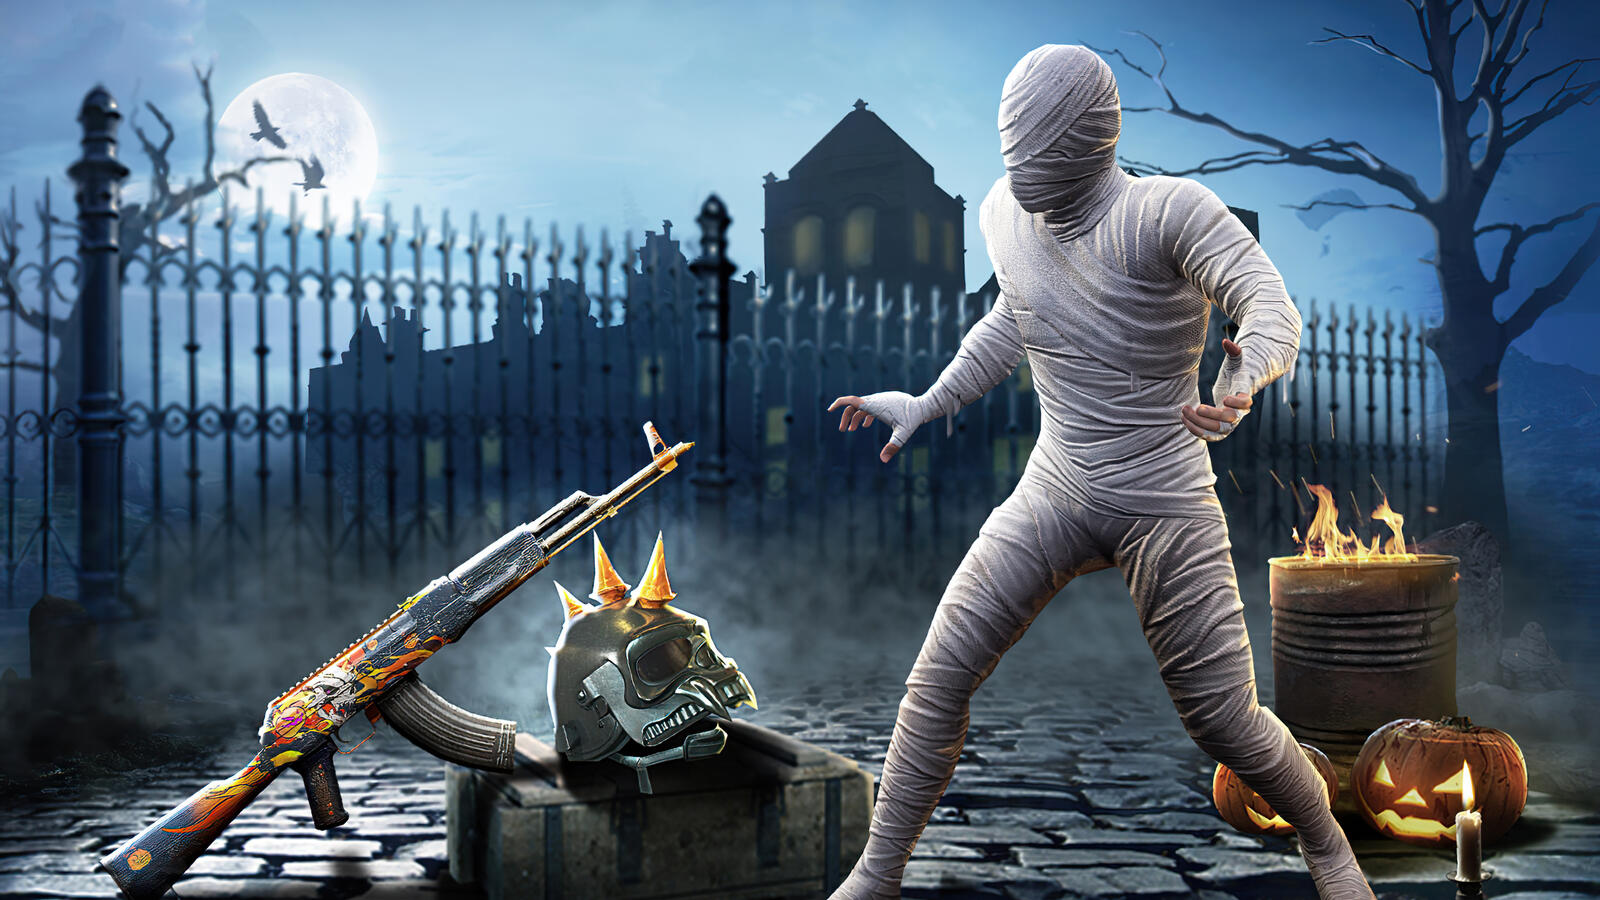 Free photo The mummy goes after the machine in Playerunknowns Battlegrounds